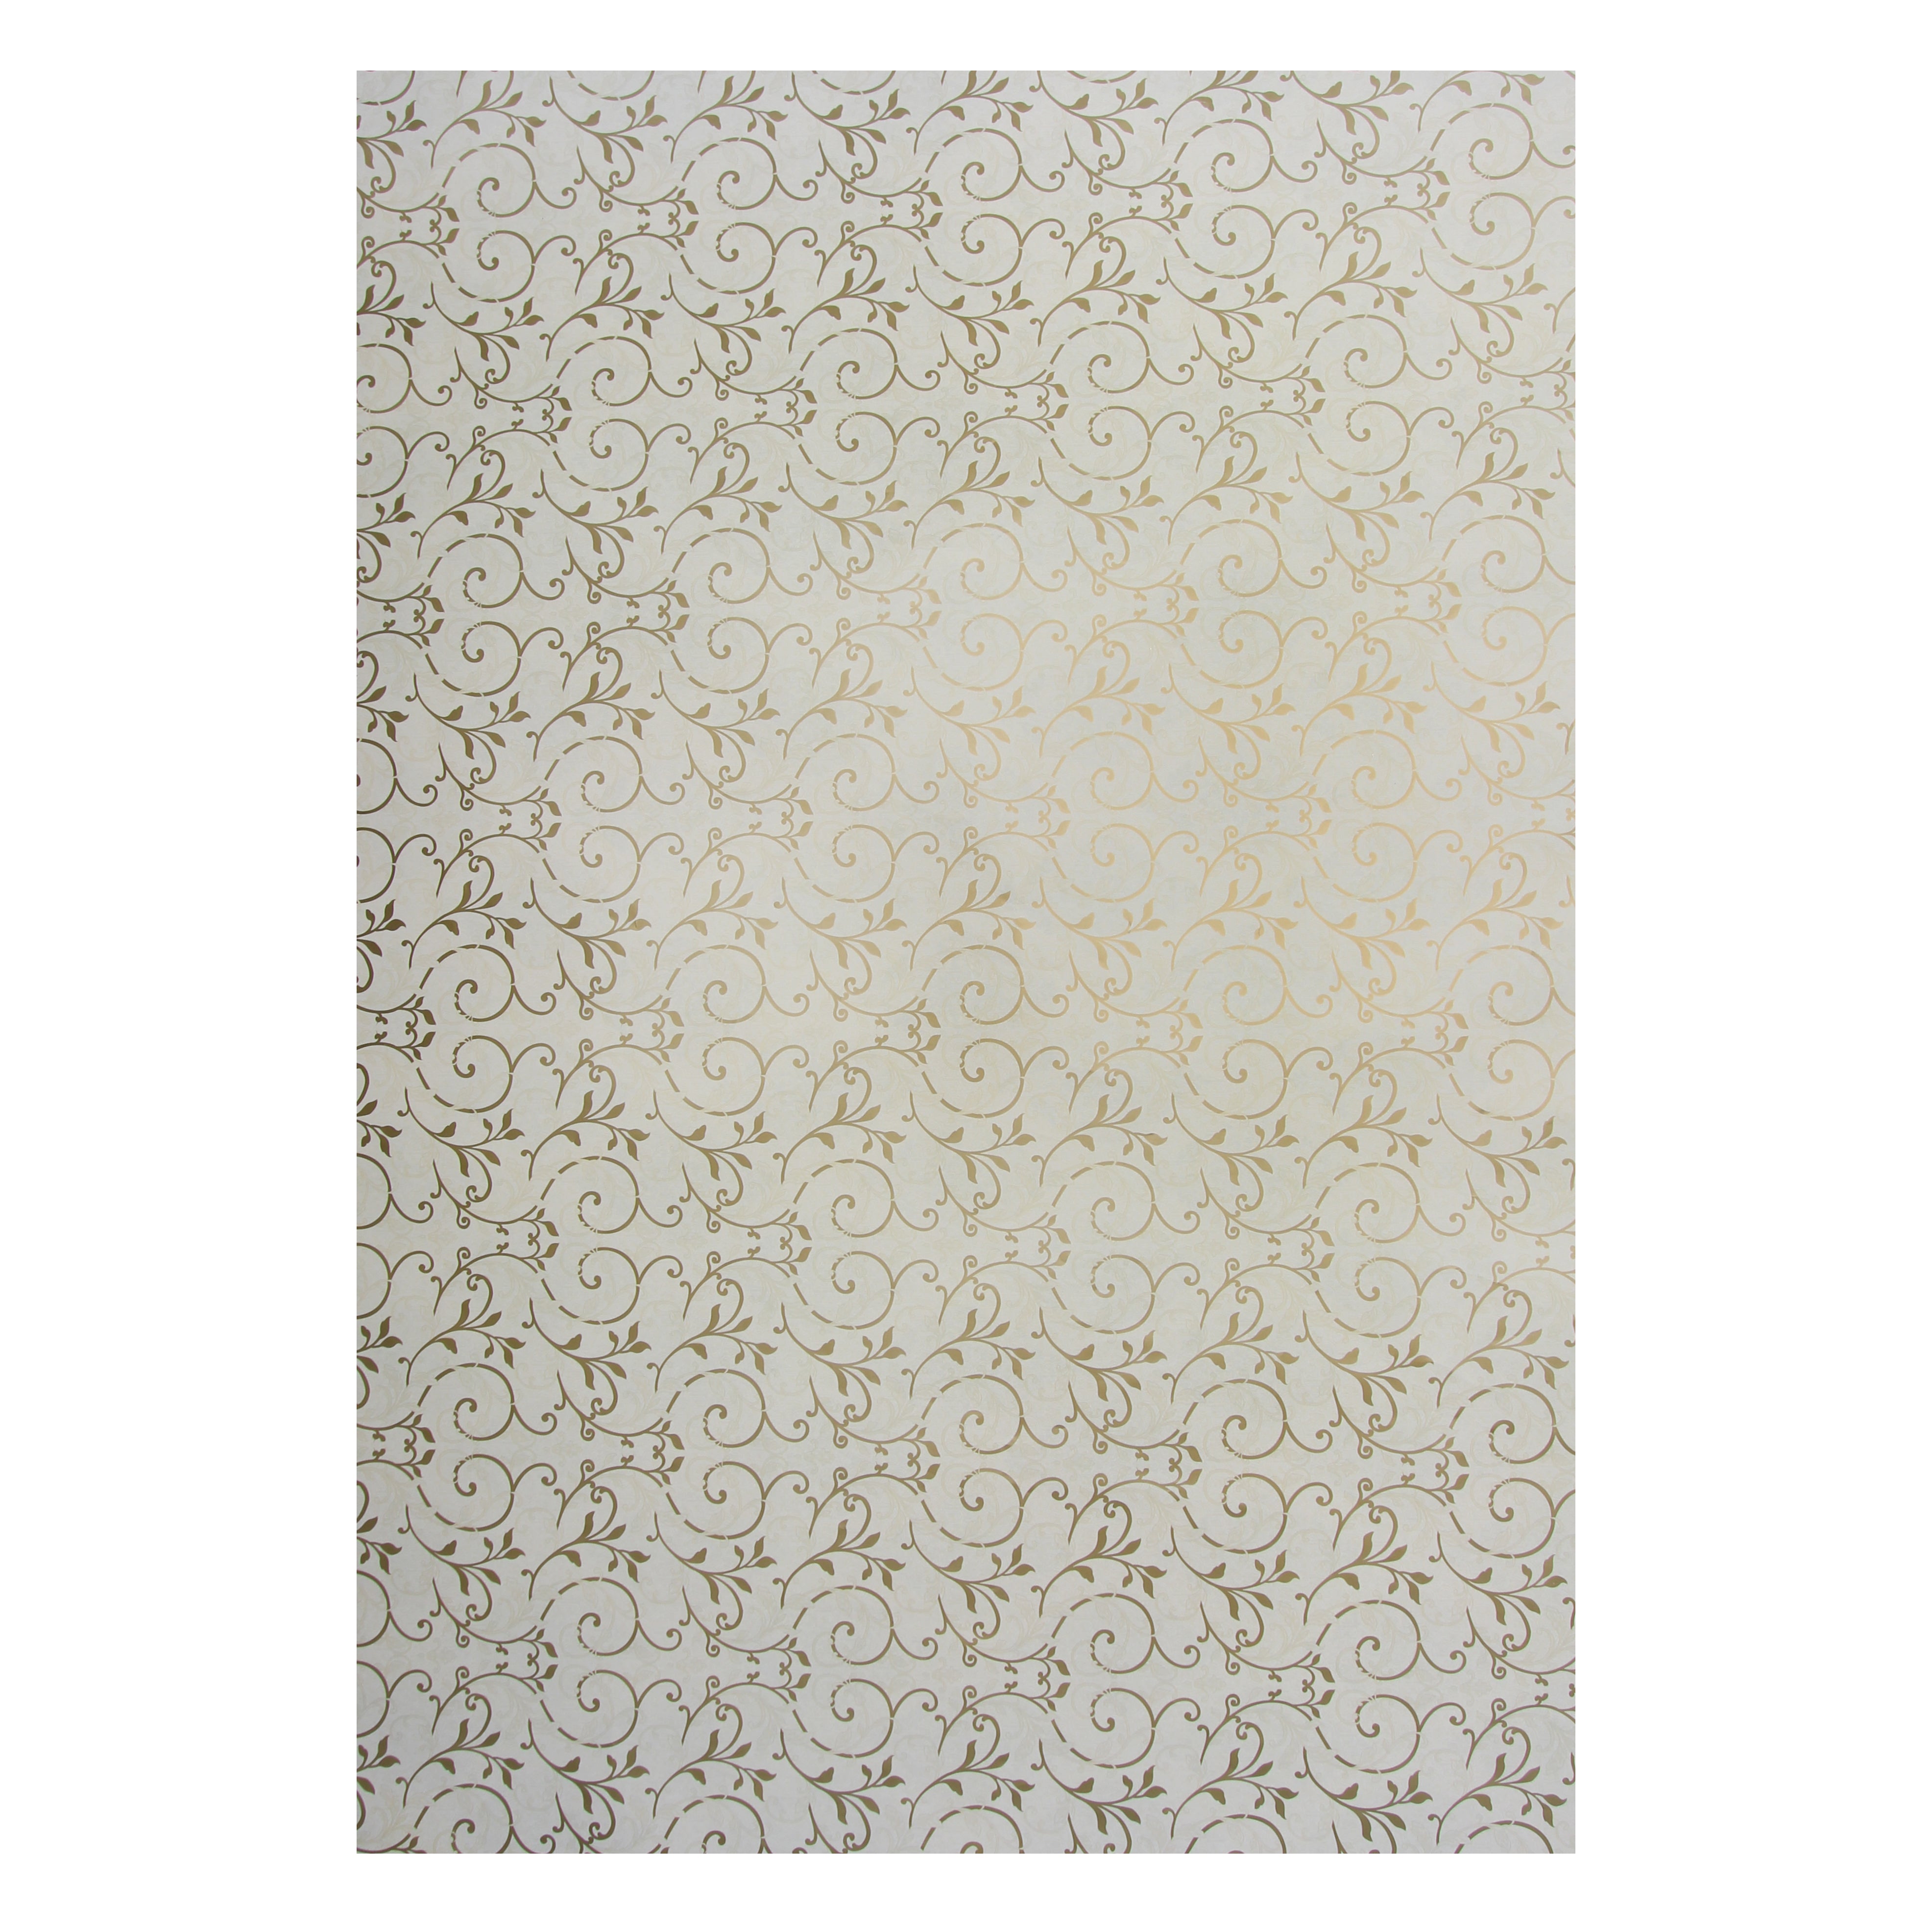 Gift Wraps Floral Swirl Ivory Shimmer 20 X 30Inch 1Sheet Gol